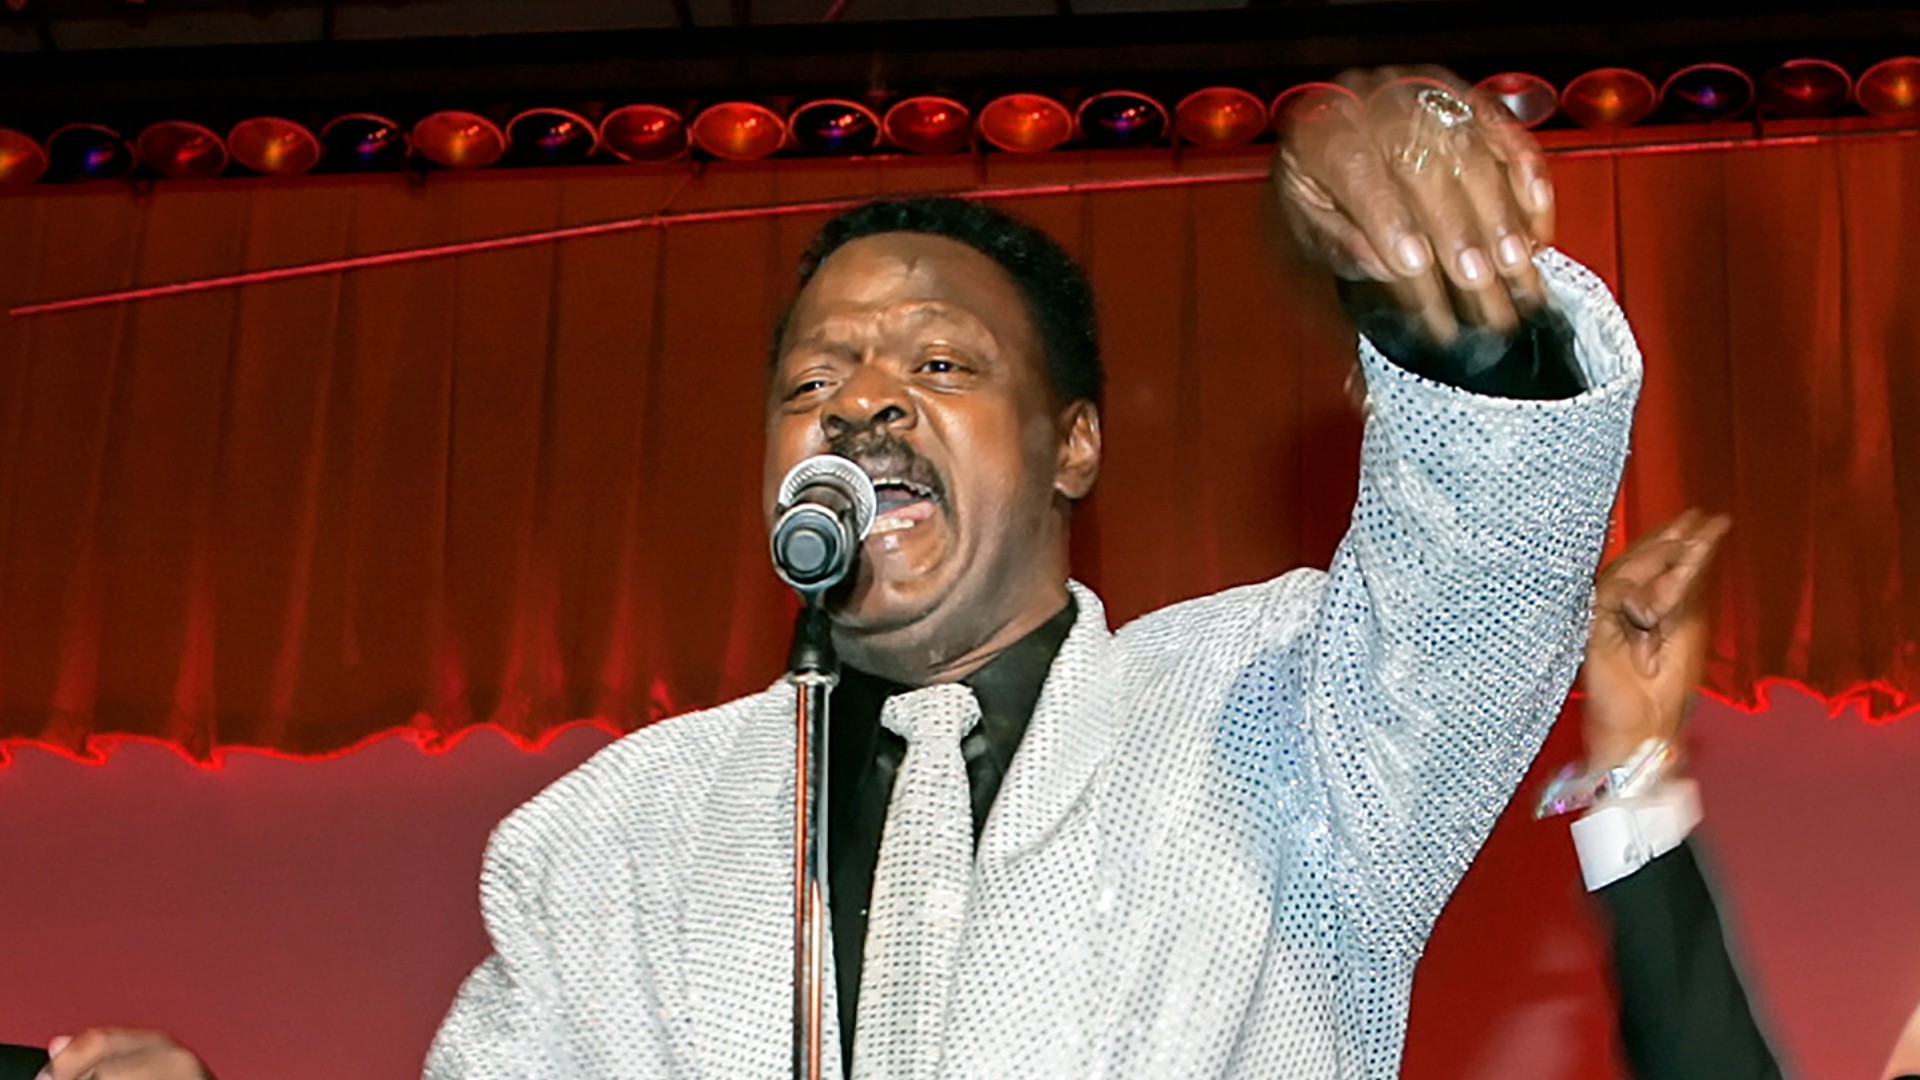 William Hart, Driving Force Behind the Delfonics, Dies at 77 - The